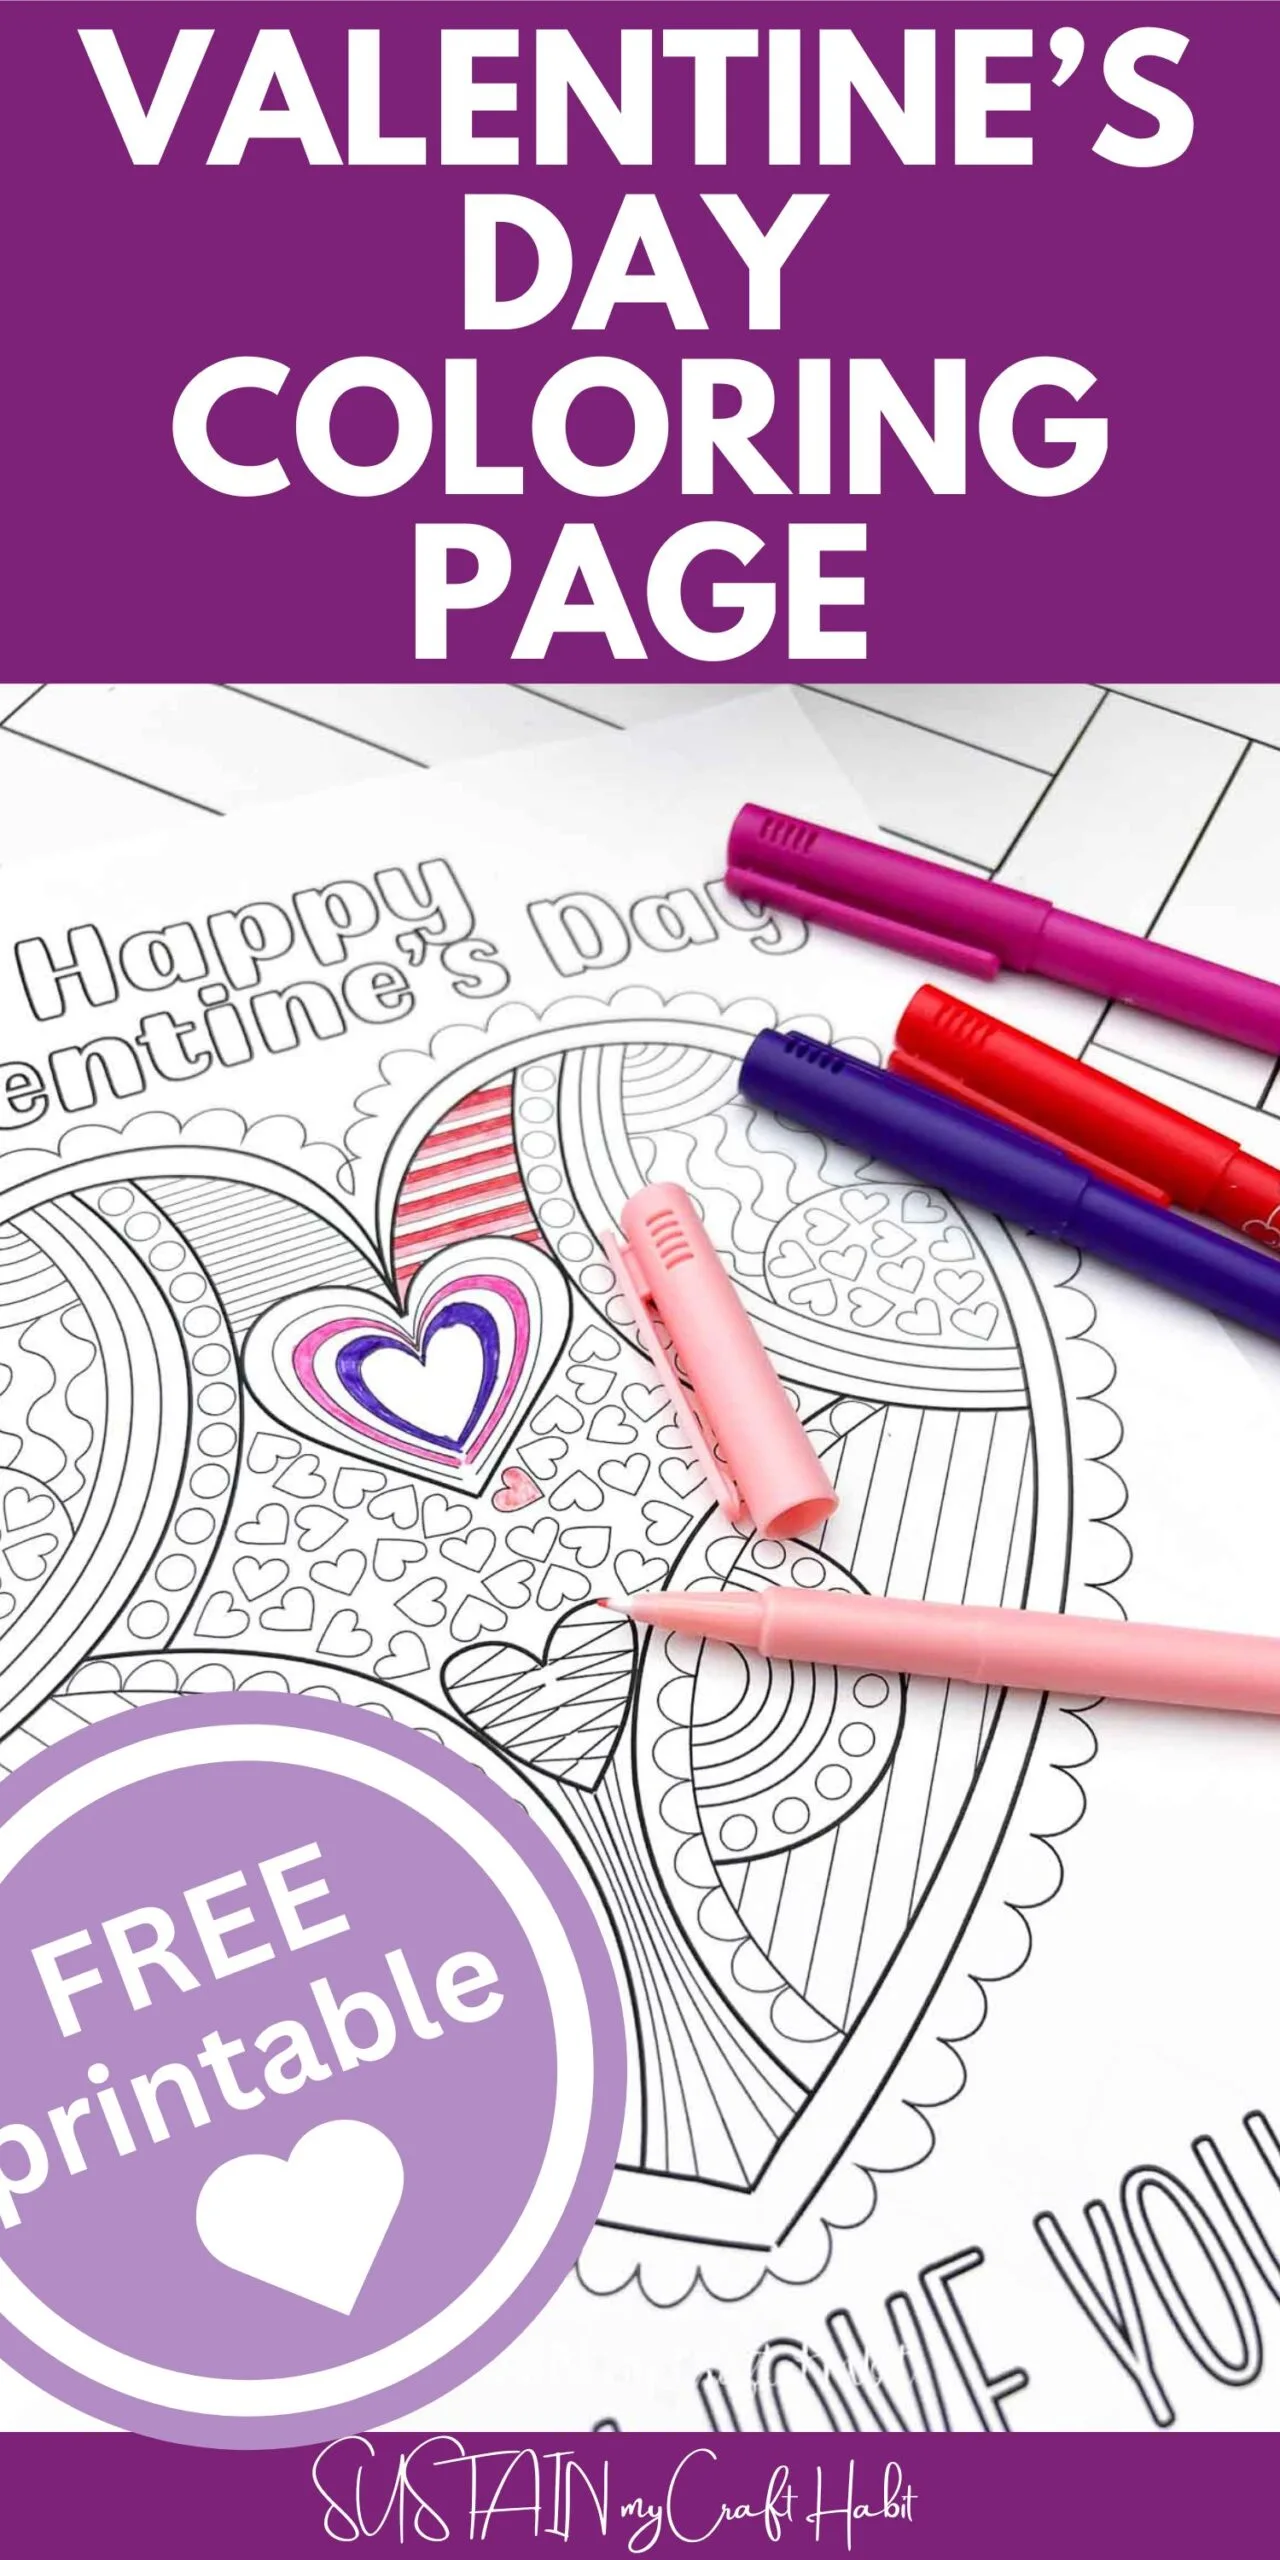 Valentine's day heart coloring page with text overlay.